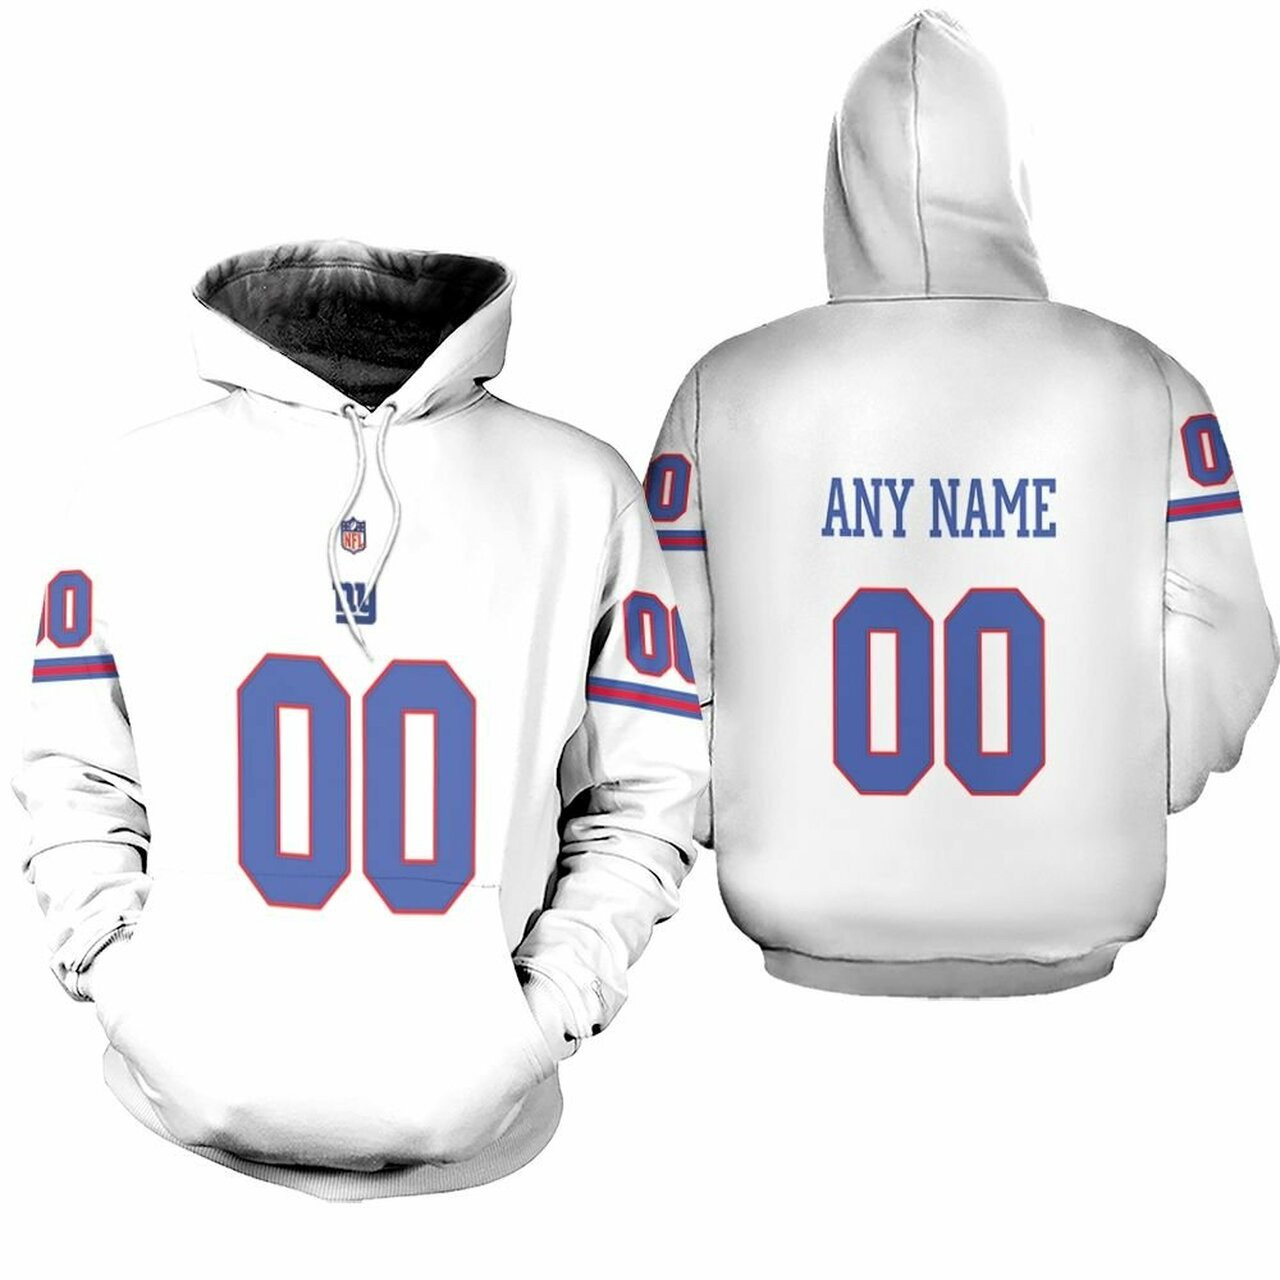 New York Giants Nfl American Football Team Color Rush Limited Jersey Style Custom Gift For Giants Fans Hoodie